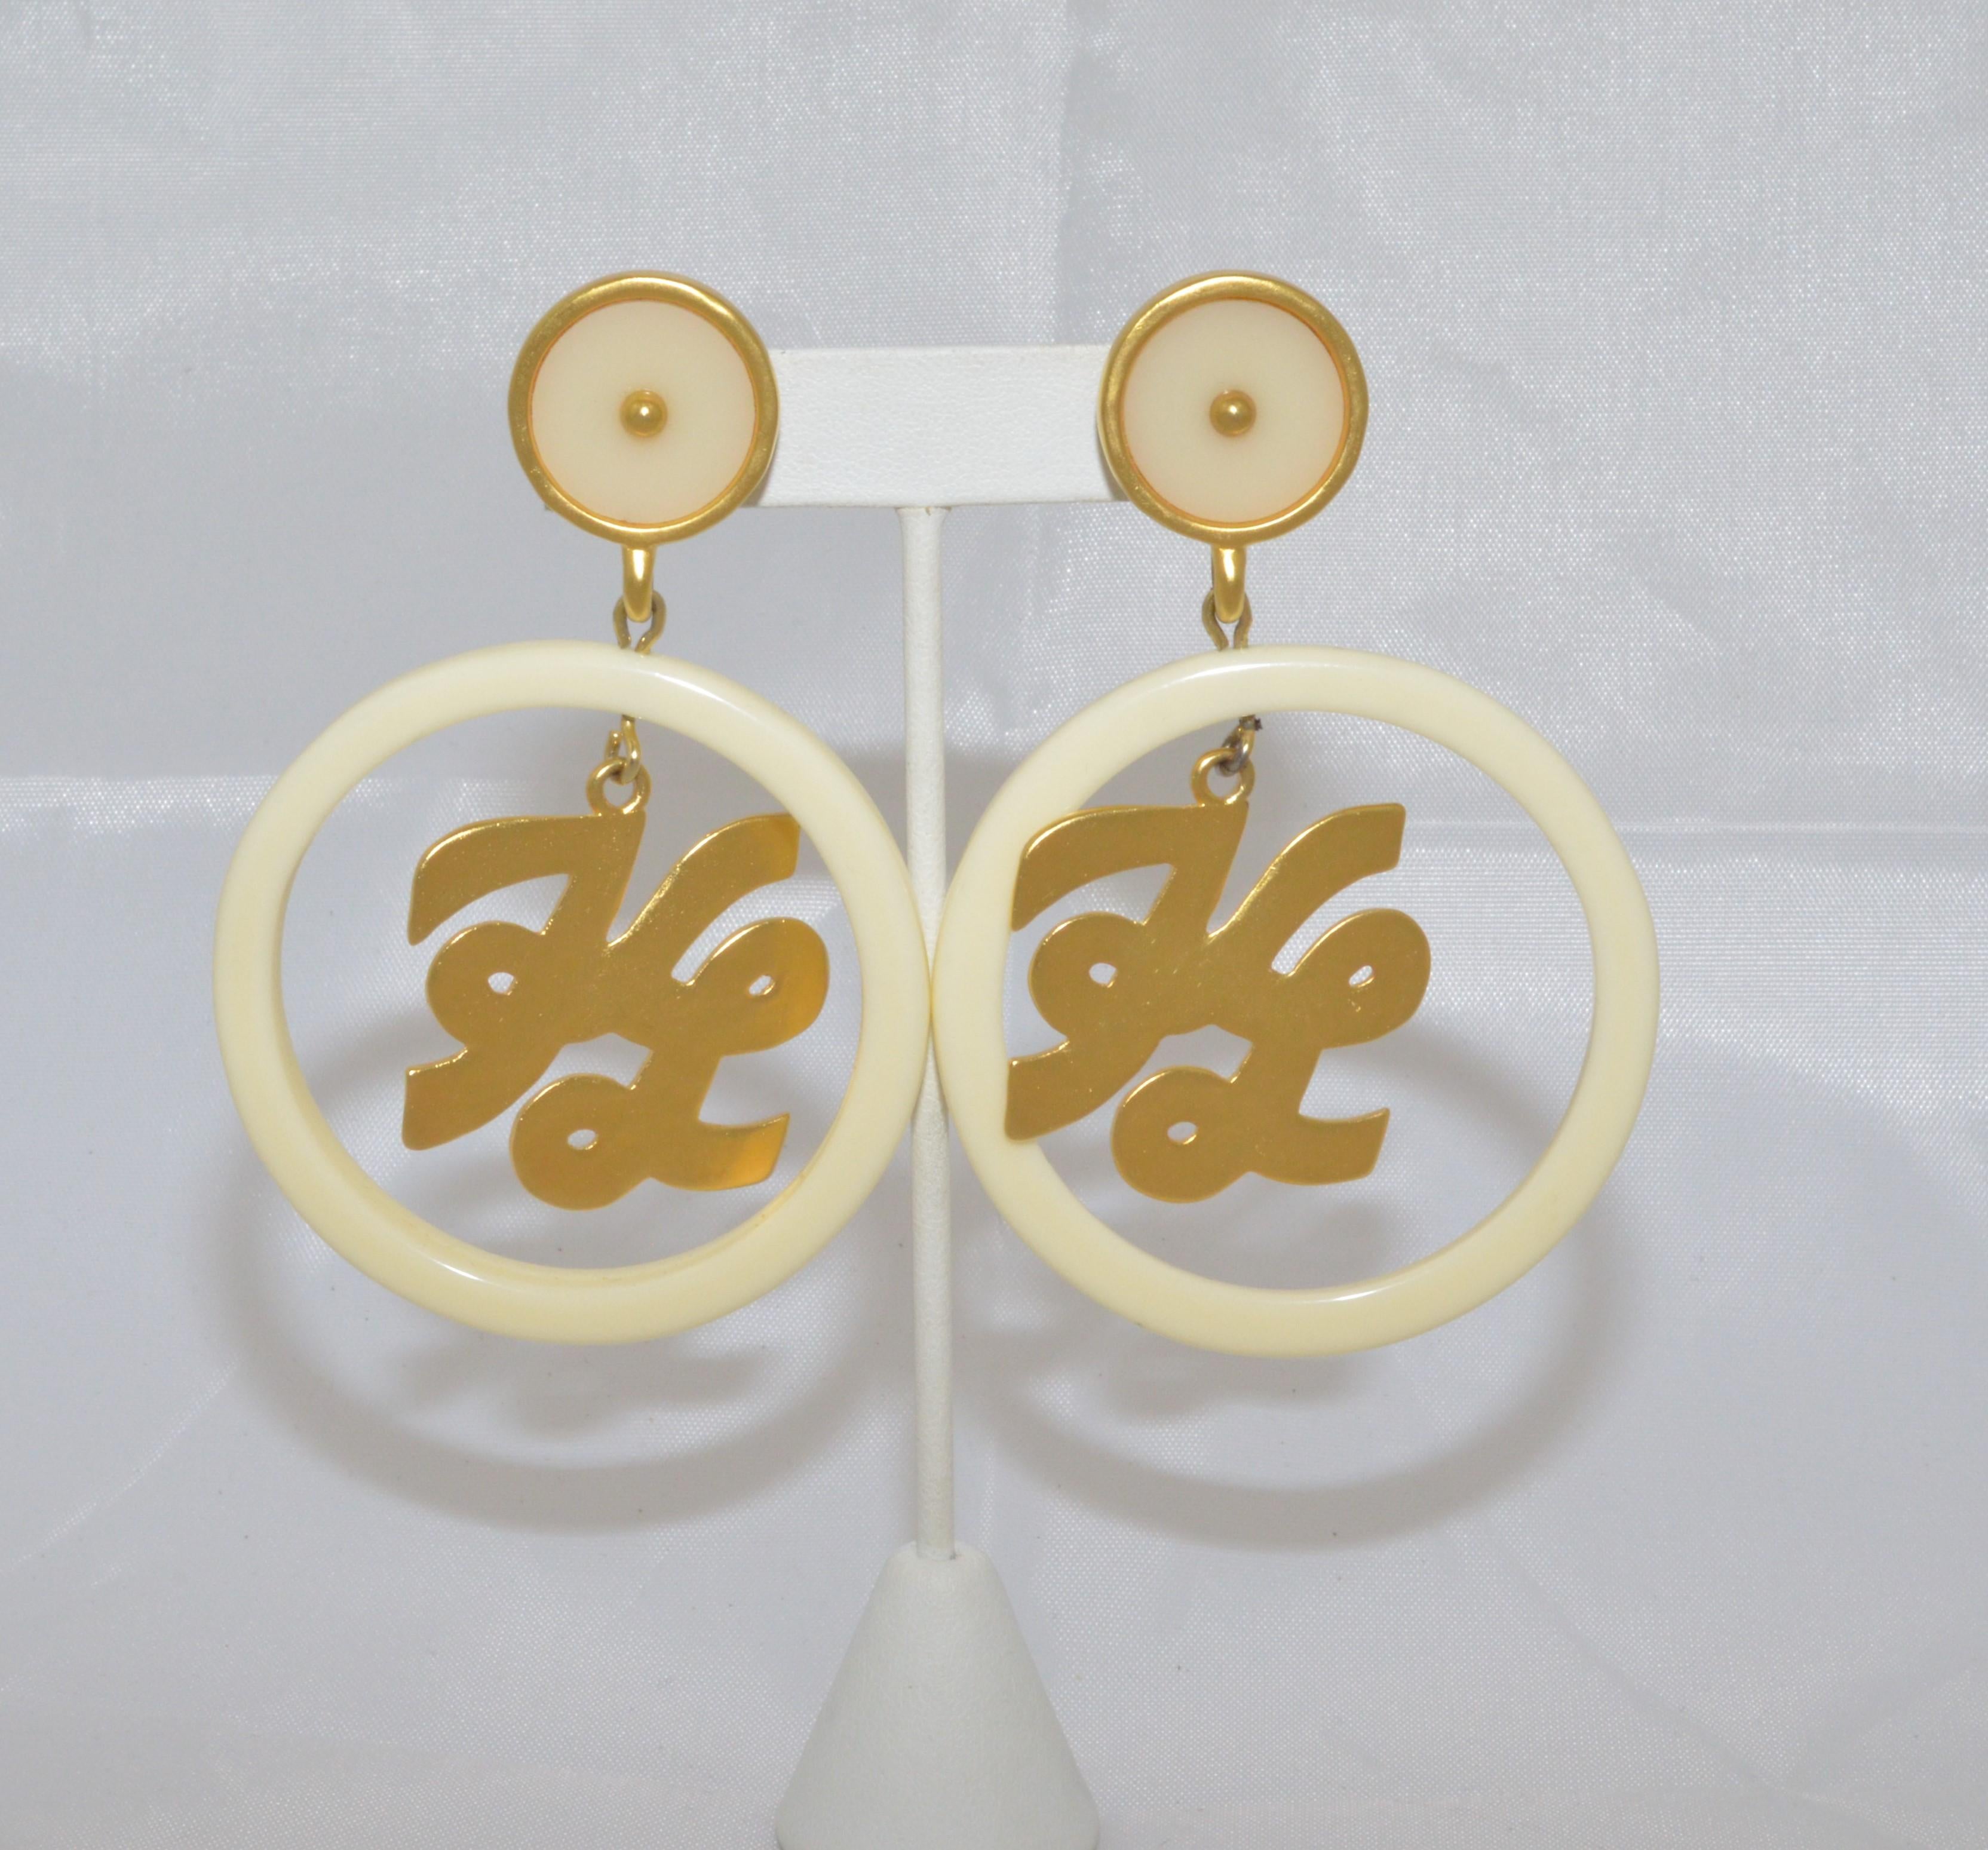 Karl Lagerfeld earrings feature a cream lucite hoop with gold-tone KL initials dangled from the top and a clip on fastening. Earrings are in excellent vintage condition.

Measurement:
Drop - 3.75''